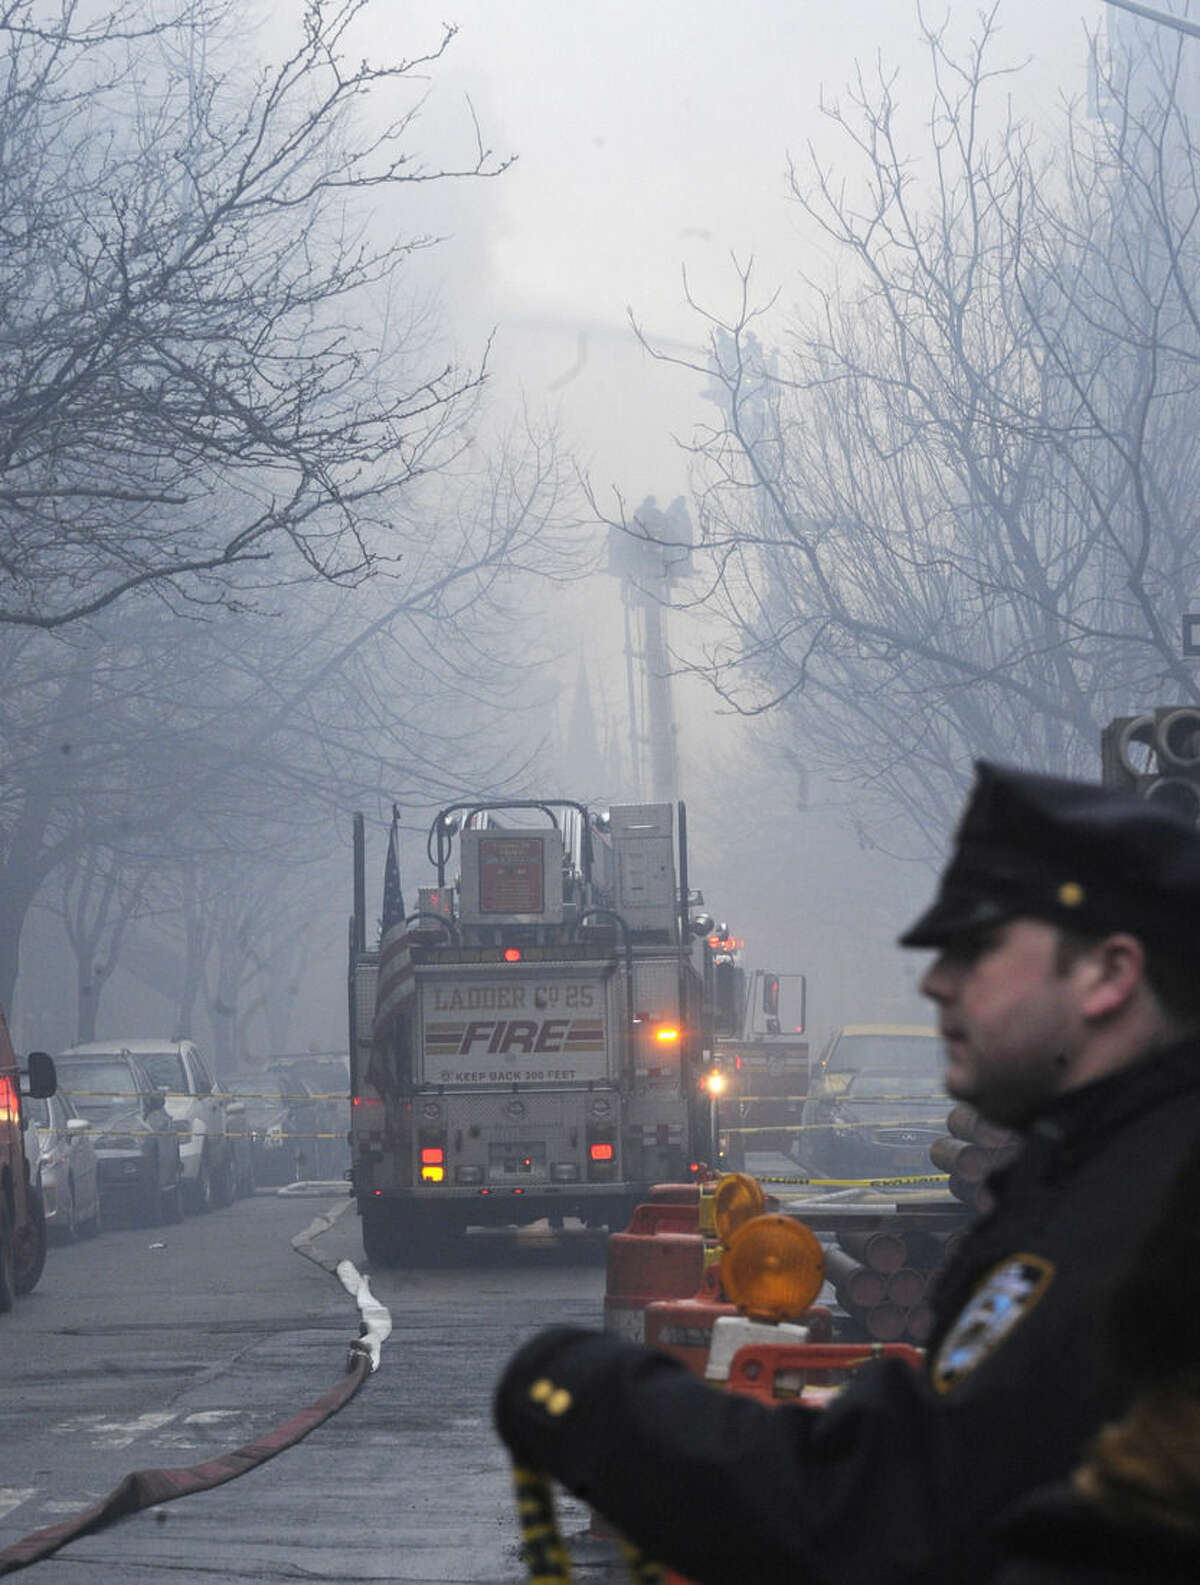 New York City firefighters arrive at the scene of a large fire and a partial building collapse in the East Village neighborhood of New York on Thursday, March 26, 2015. Orange flames and black smoke are billowing from the facade and roof of the building near several New York University buildings. (AP Photo/ Louis Lanzano)